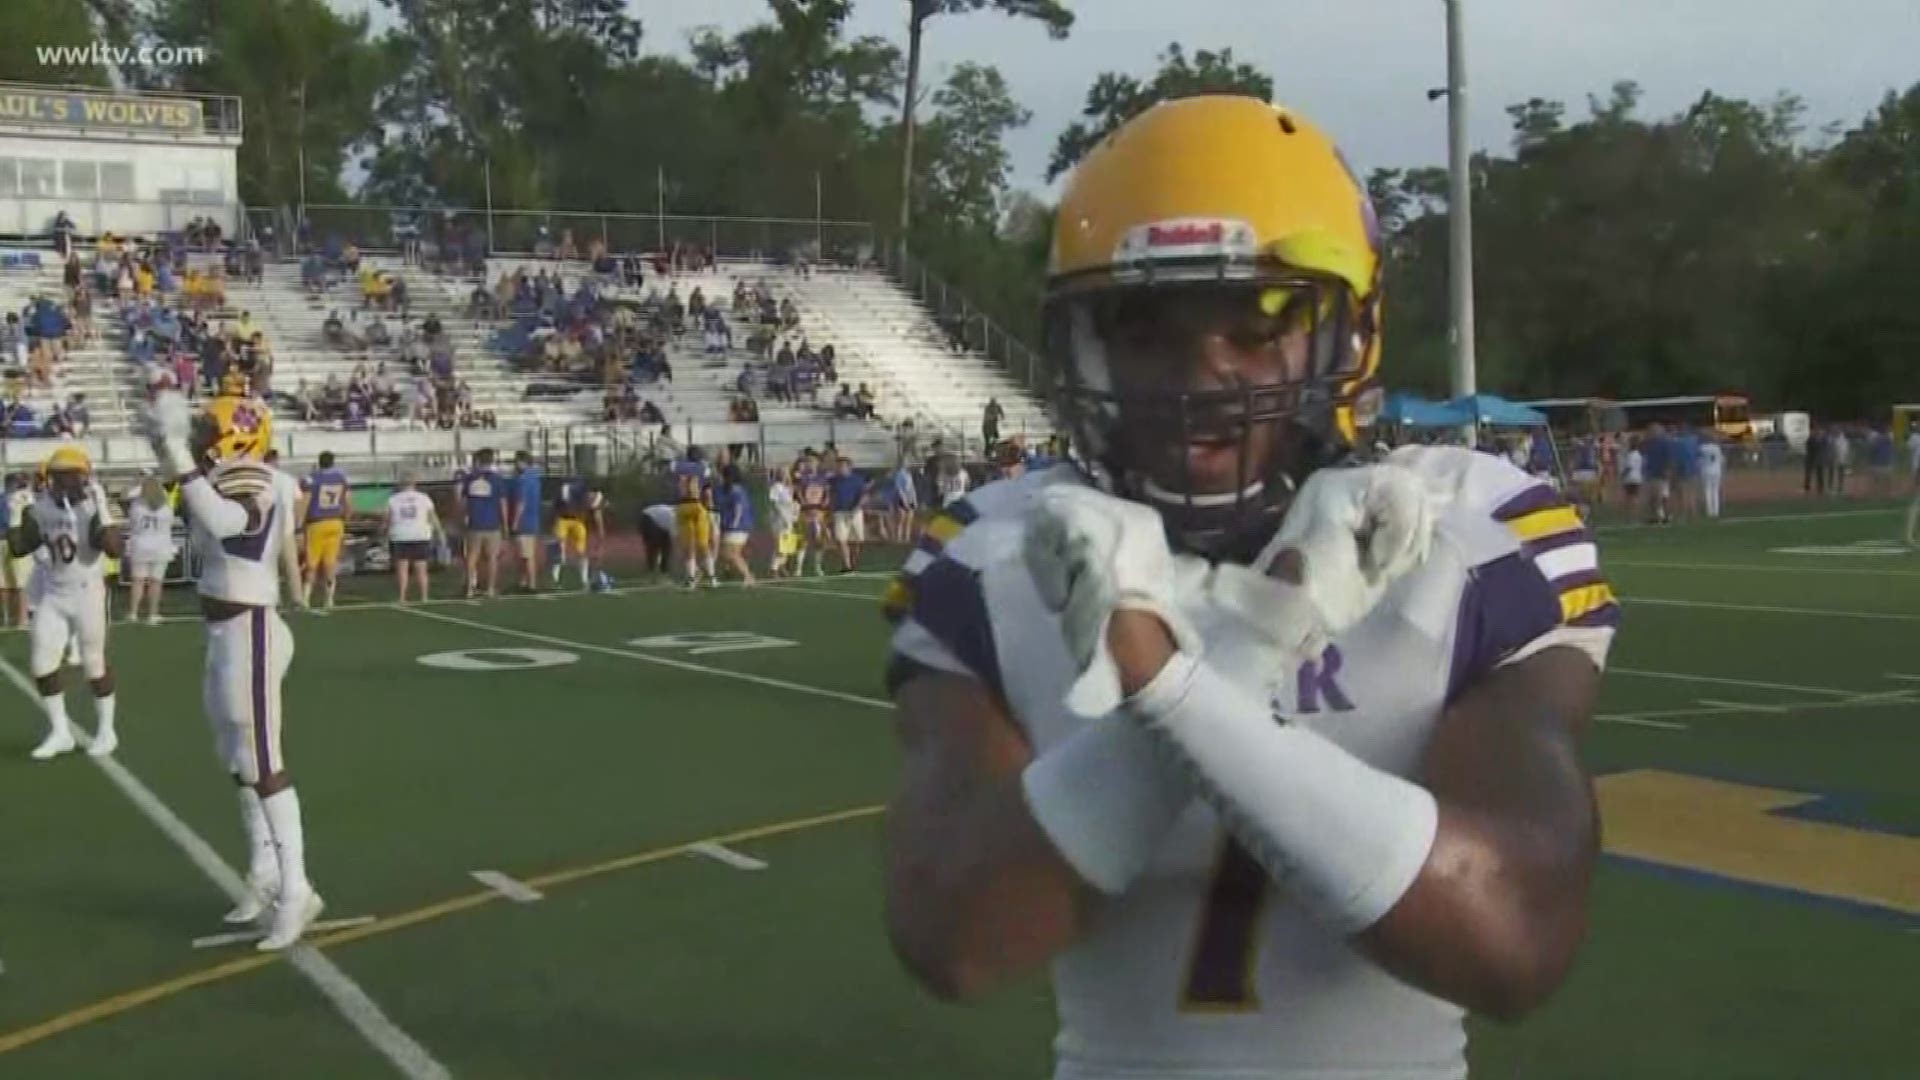 Karr beat St. Paul's 33-30 to open the season in our fourth down friday game of the week.